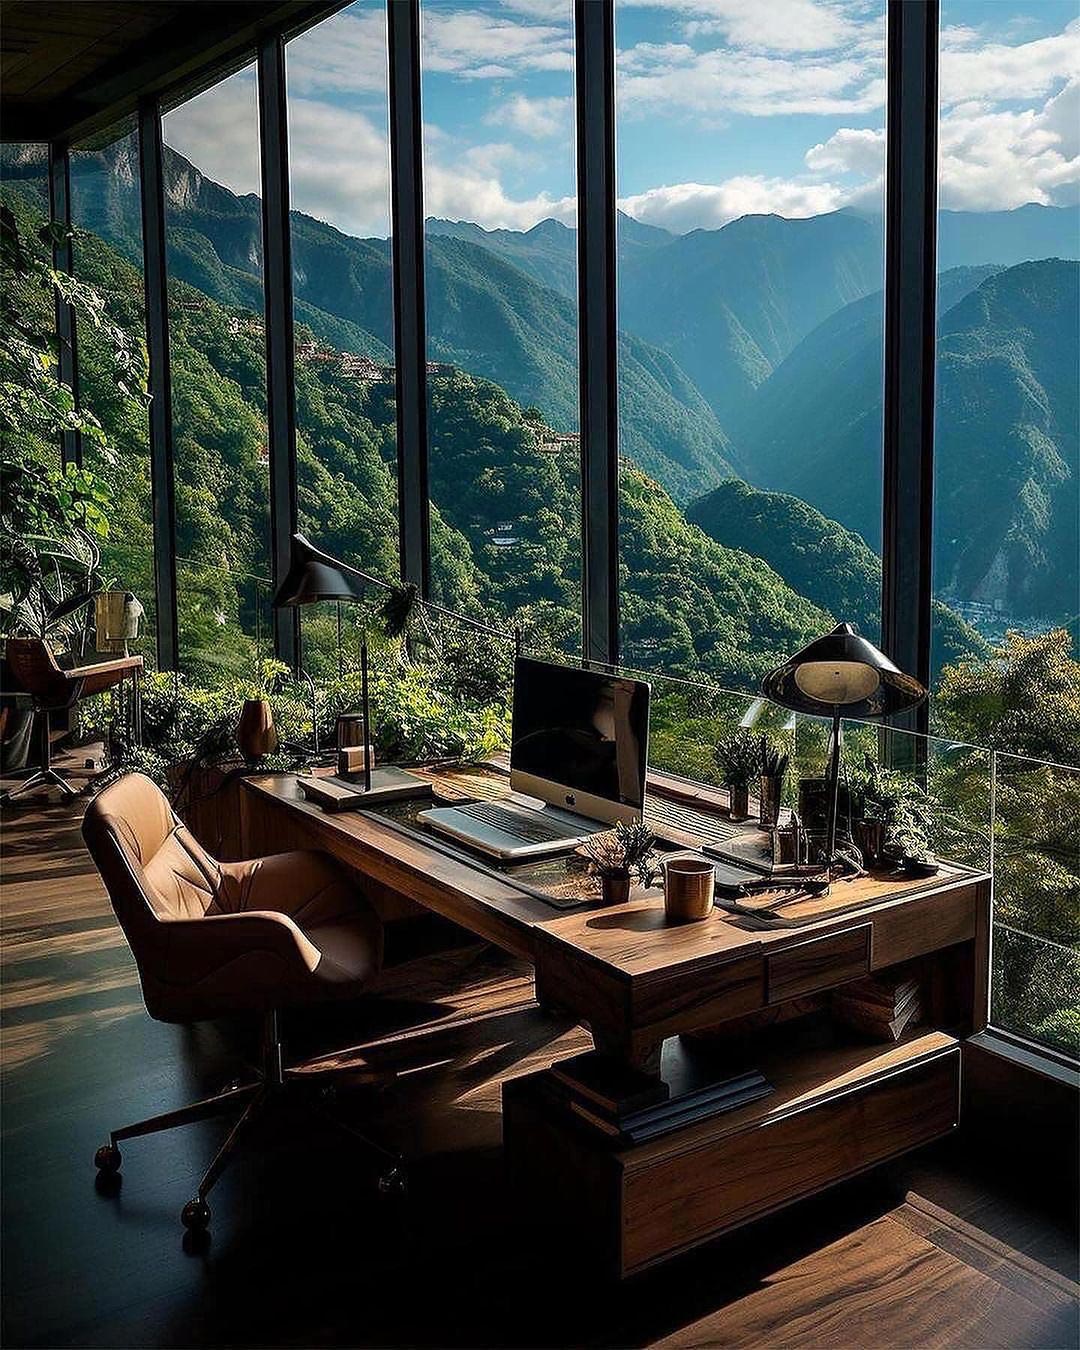 Home office overlooking lush green valley below